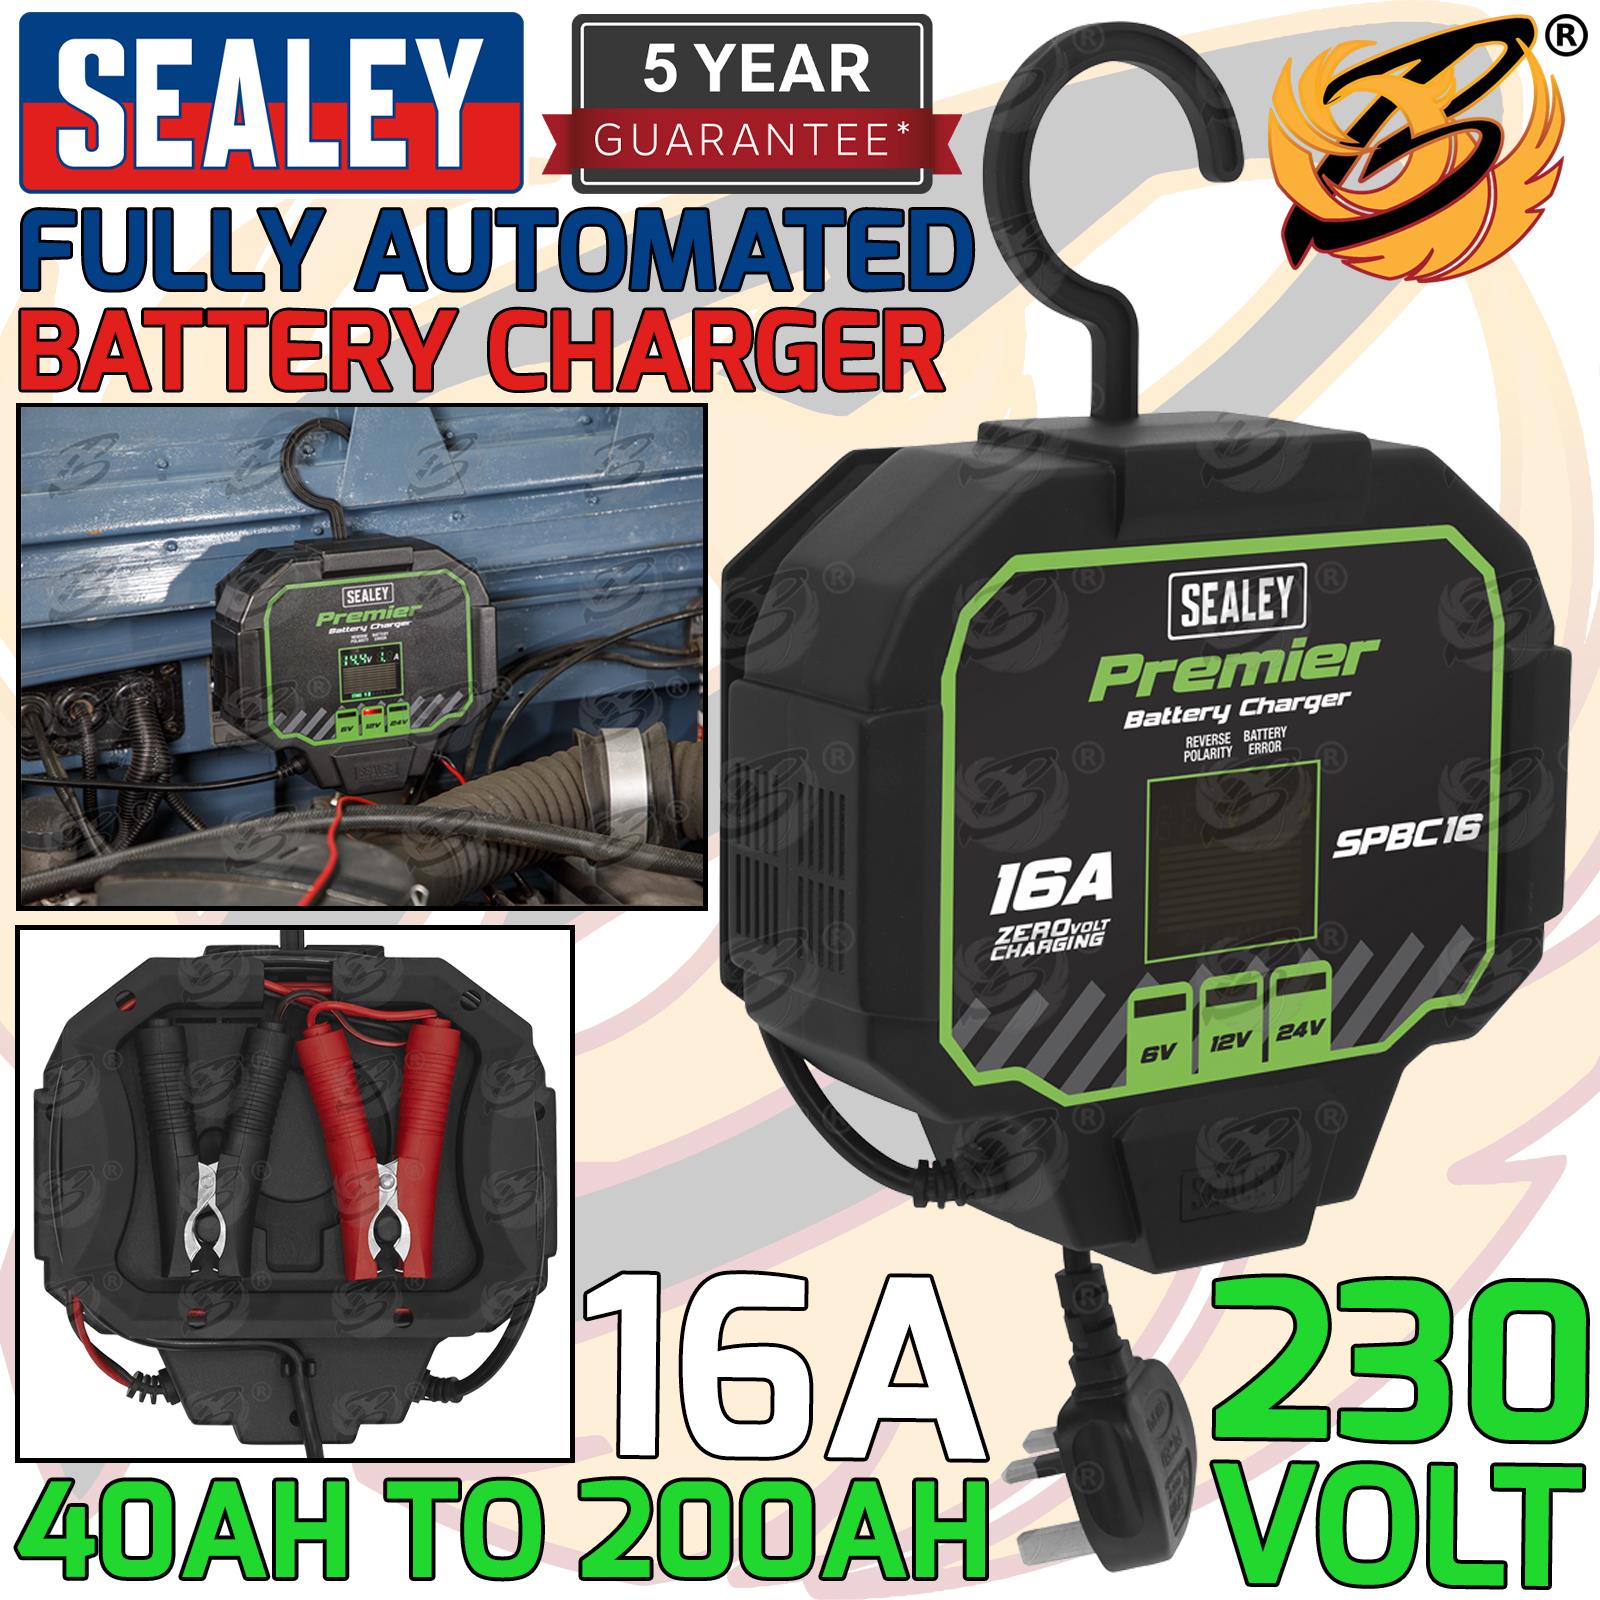 SEALEY 16A FULLY AUTOMATED BATTERY CHARGER